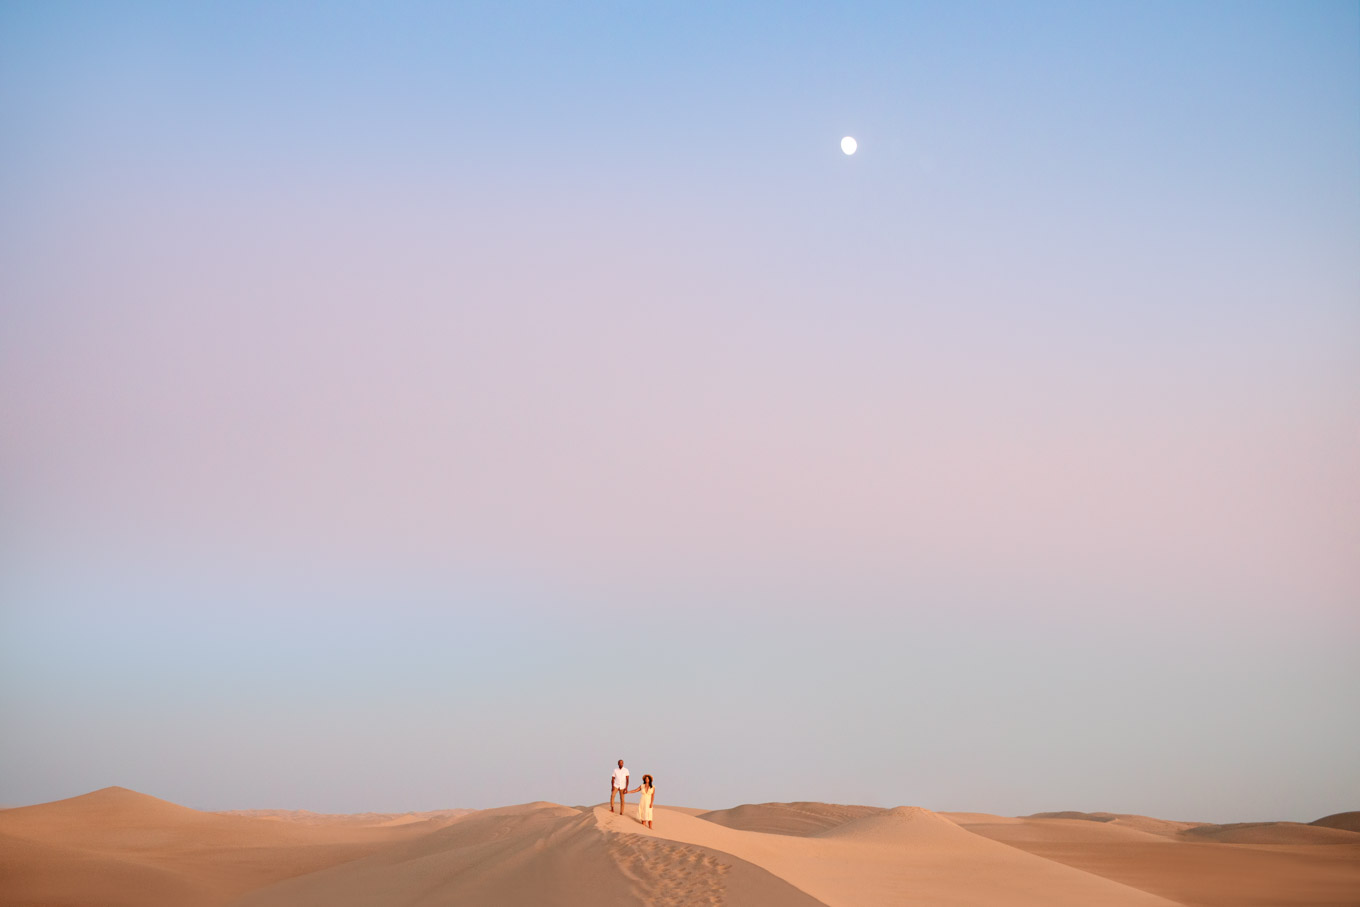 Distant view of engaged couple with beautiful sky on sand dunes | California Sand Dunes engagement session | Colorful Palm Springs wedding photography | #palmspringsphotographer #sanddunes #engagementsession #southerncalifornia  Source: Mary Costa Photography | Los Angeles